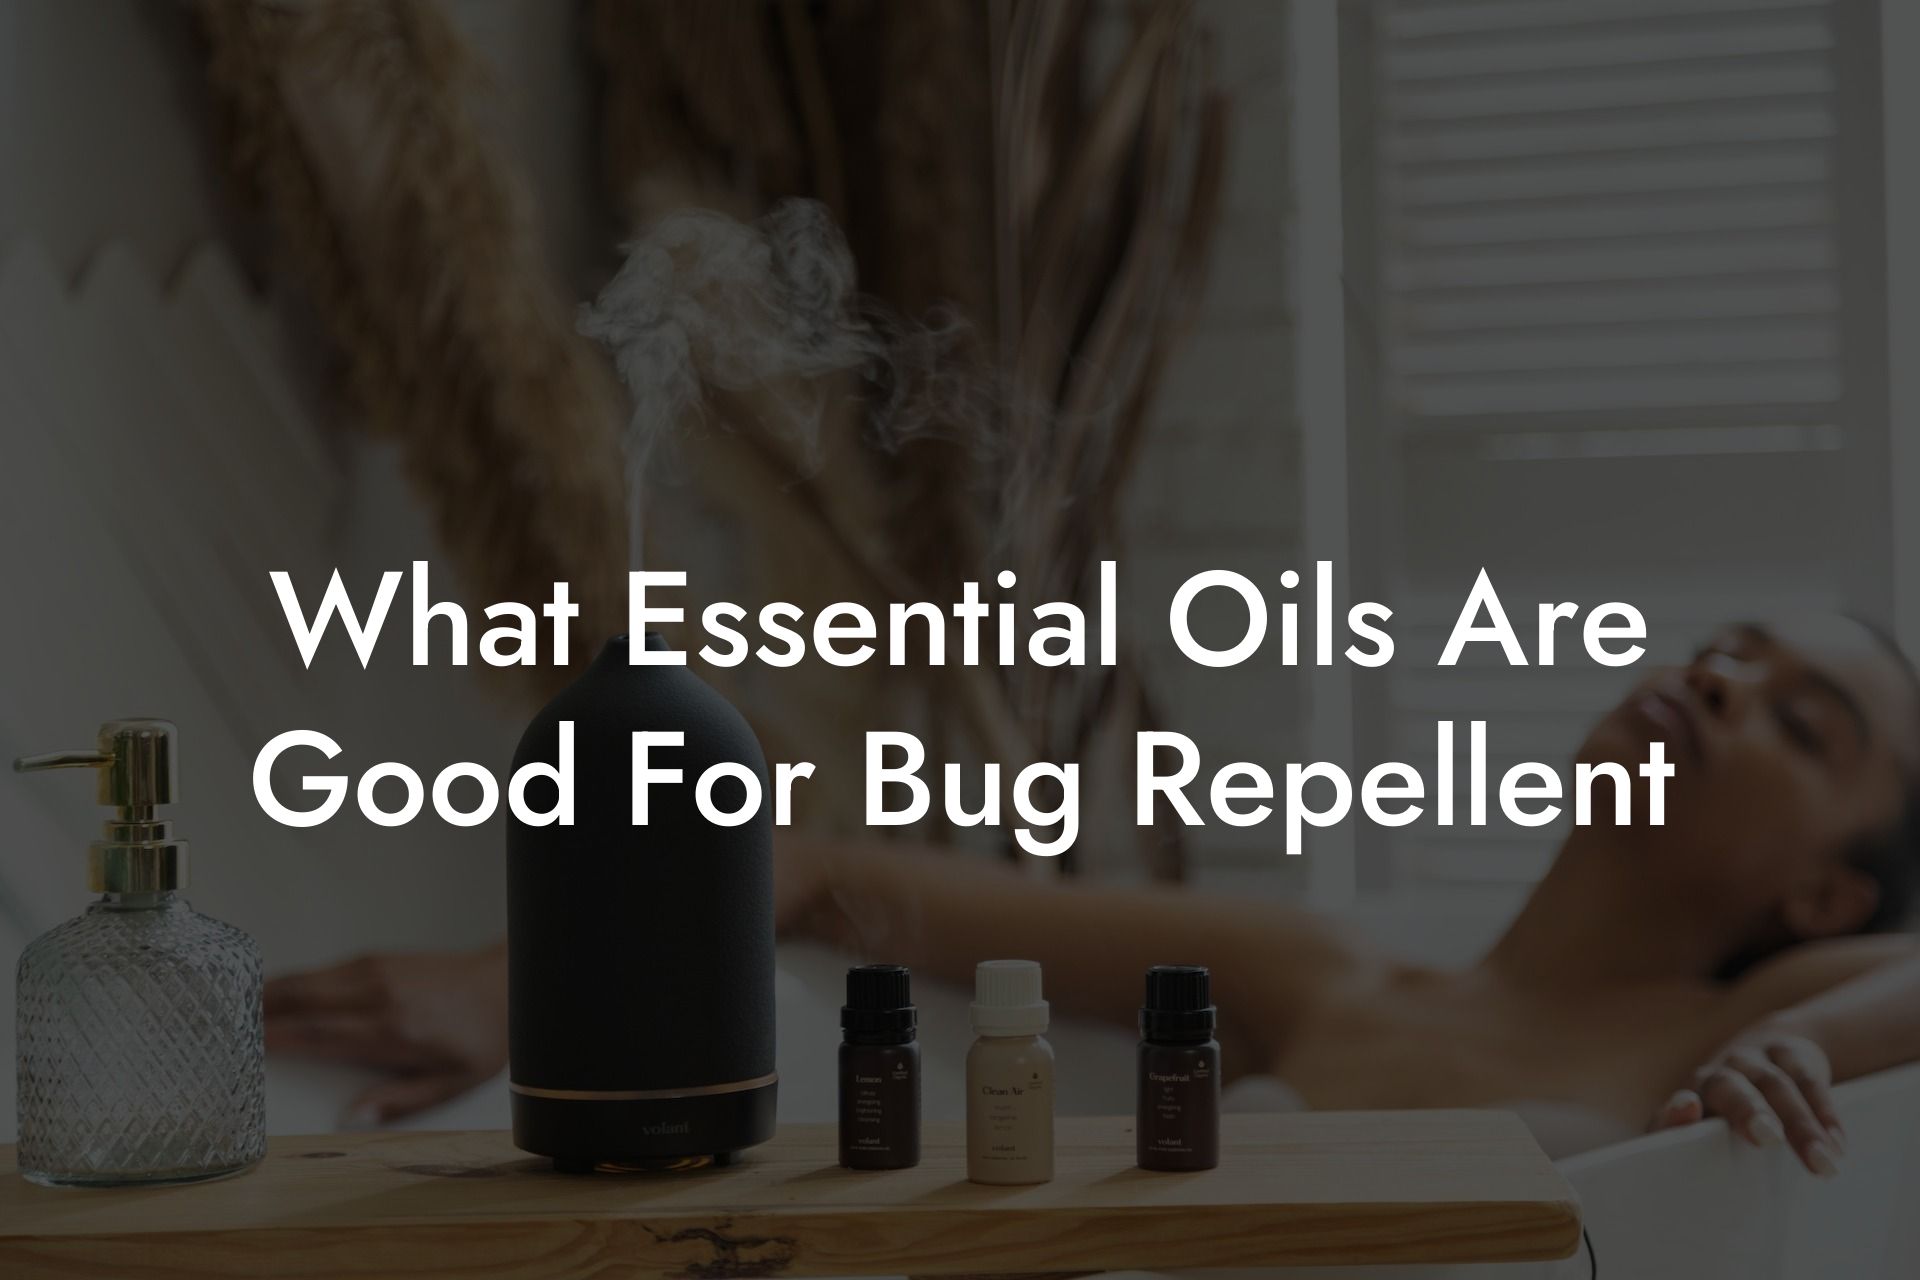 What Essential Oils Are Good For Bug Repellent